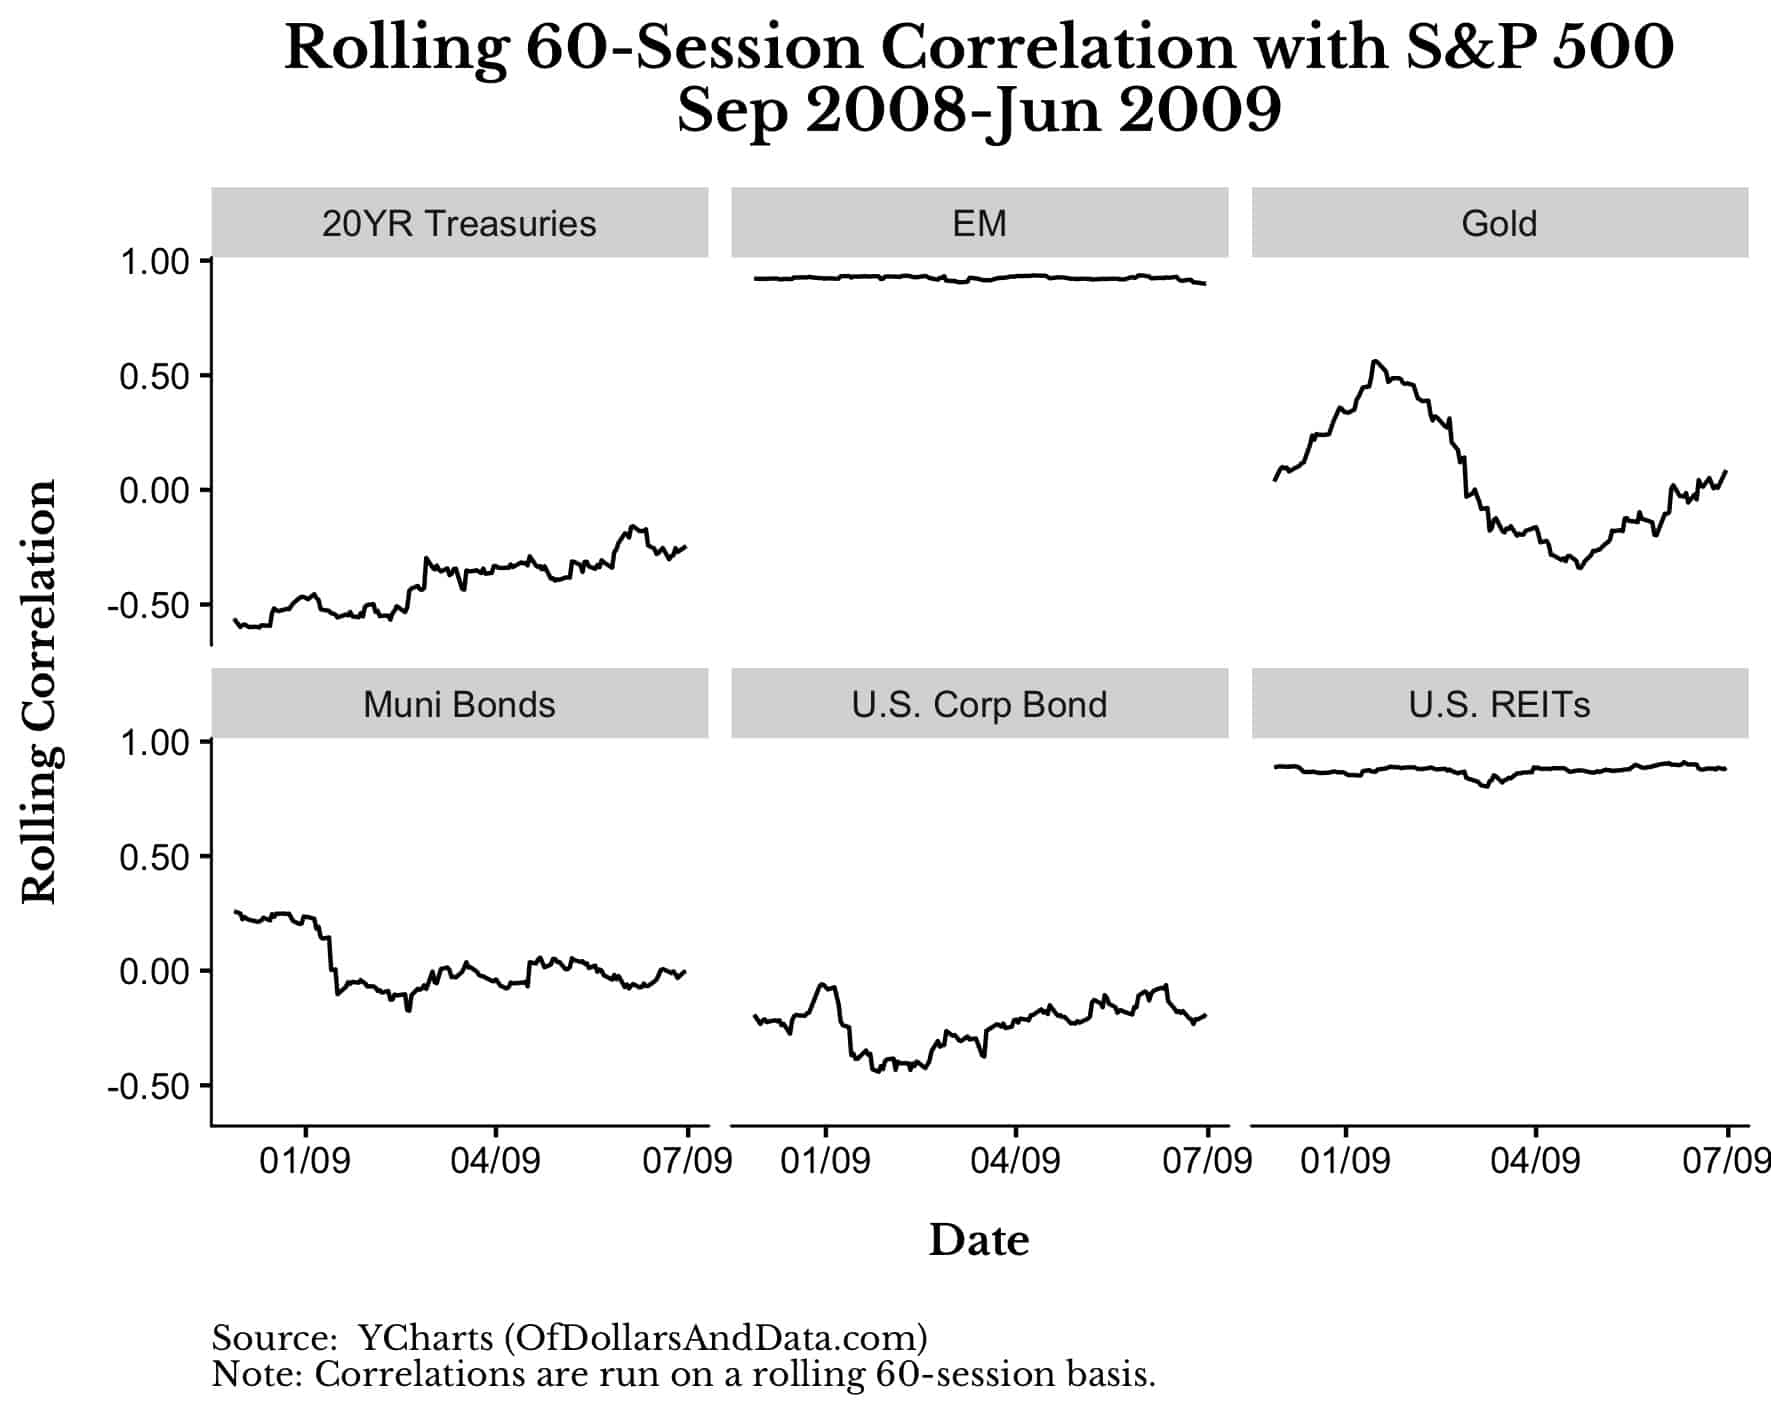 Rolling 60-session correlation of various assets with the S&P 500, Sept 2008 to June 2009